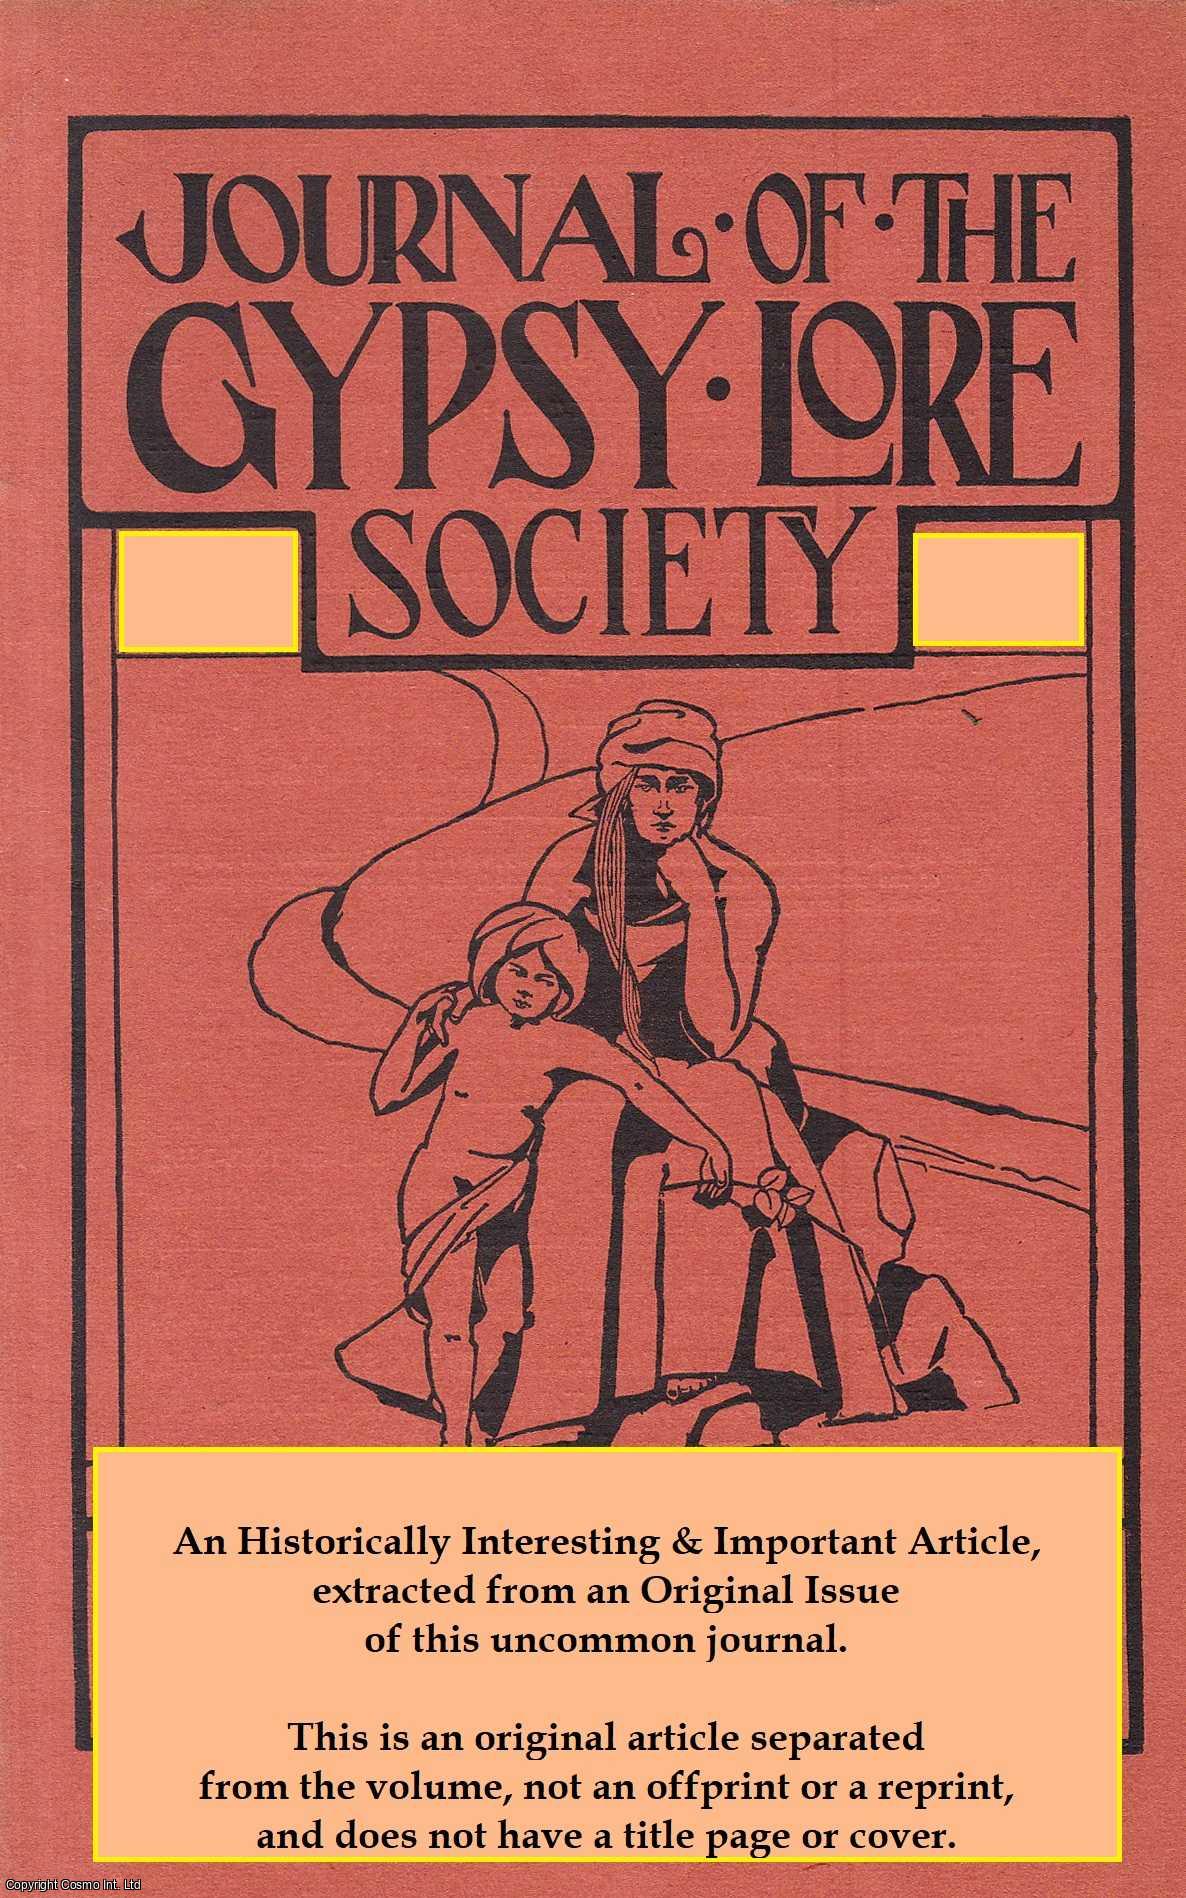 R. Hodgson - My Dukkeripen (part 2) Fortune Telling. An uncommon original article from the Journal of the Gypsy Lore Society, 1967.